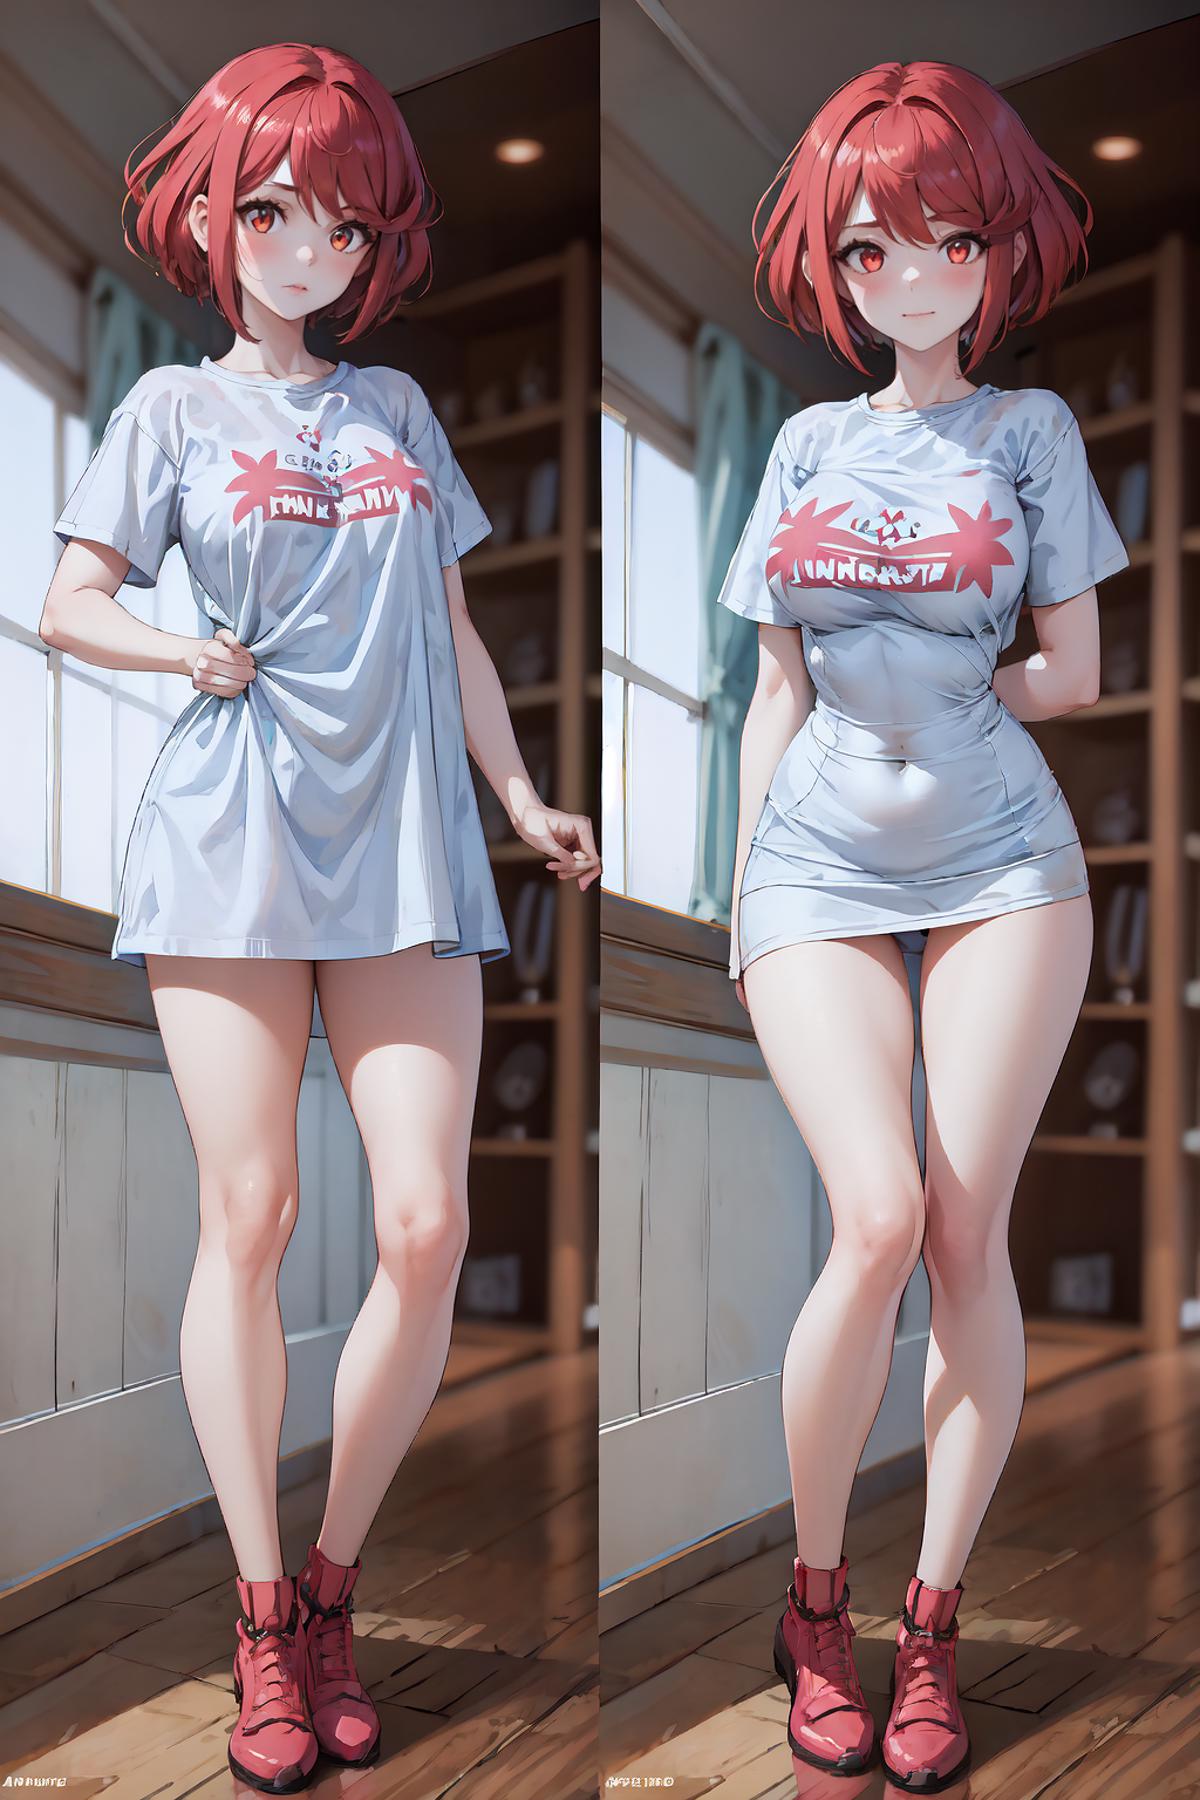 Two images of a woman in a tight shirt and short shorts.